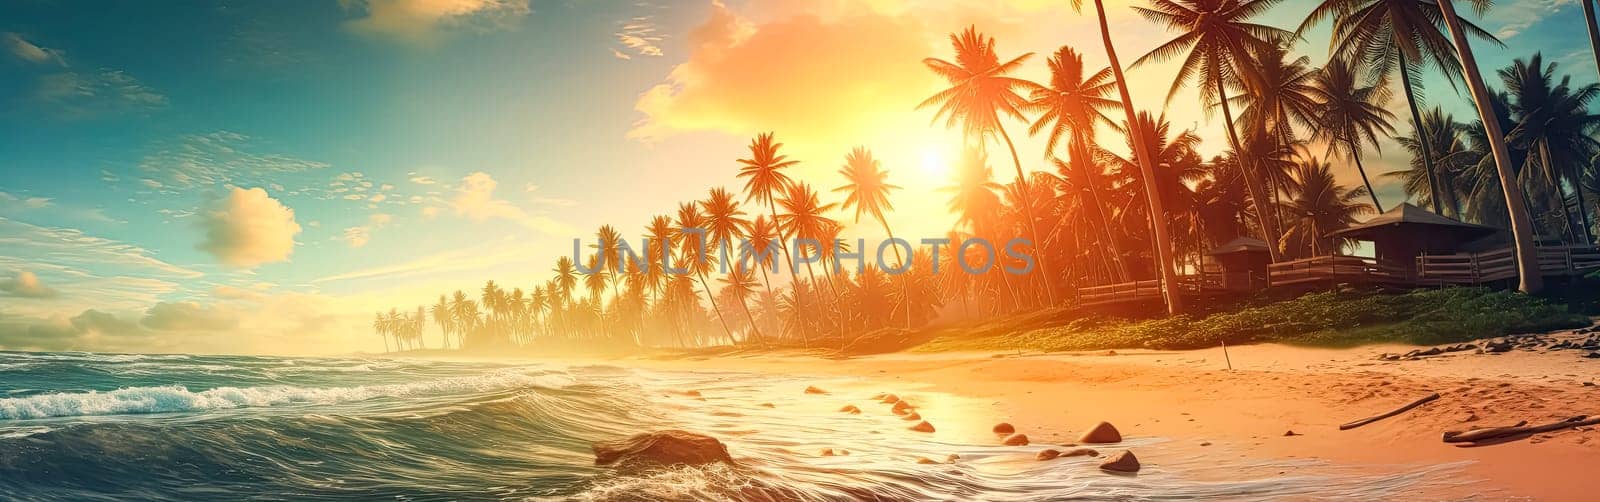 Tropical bliss on a paradise islands palm fringed beach. by Alla_Morozova93